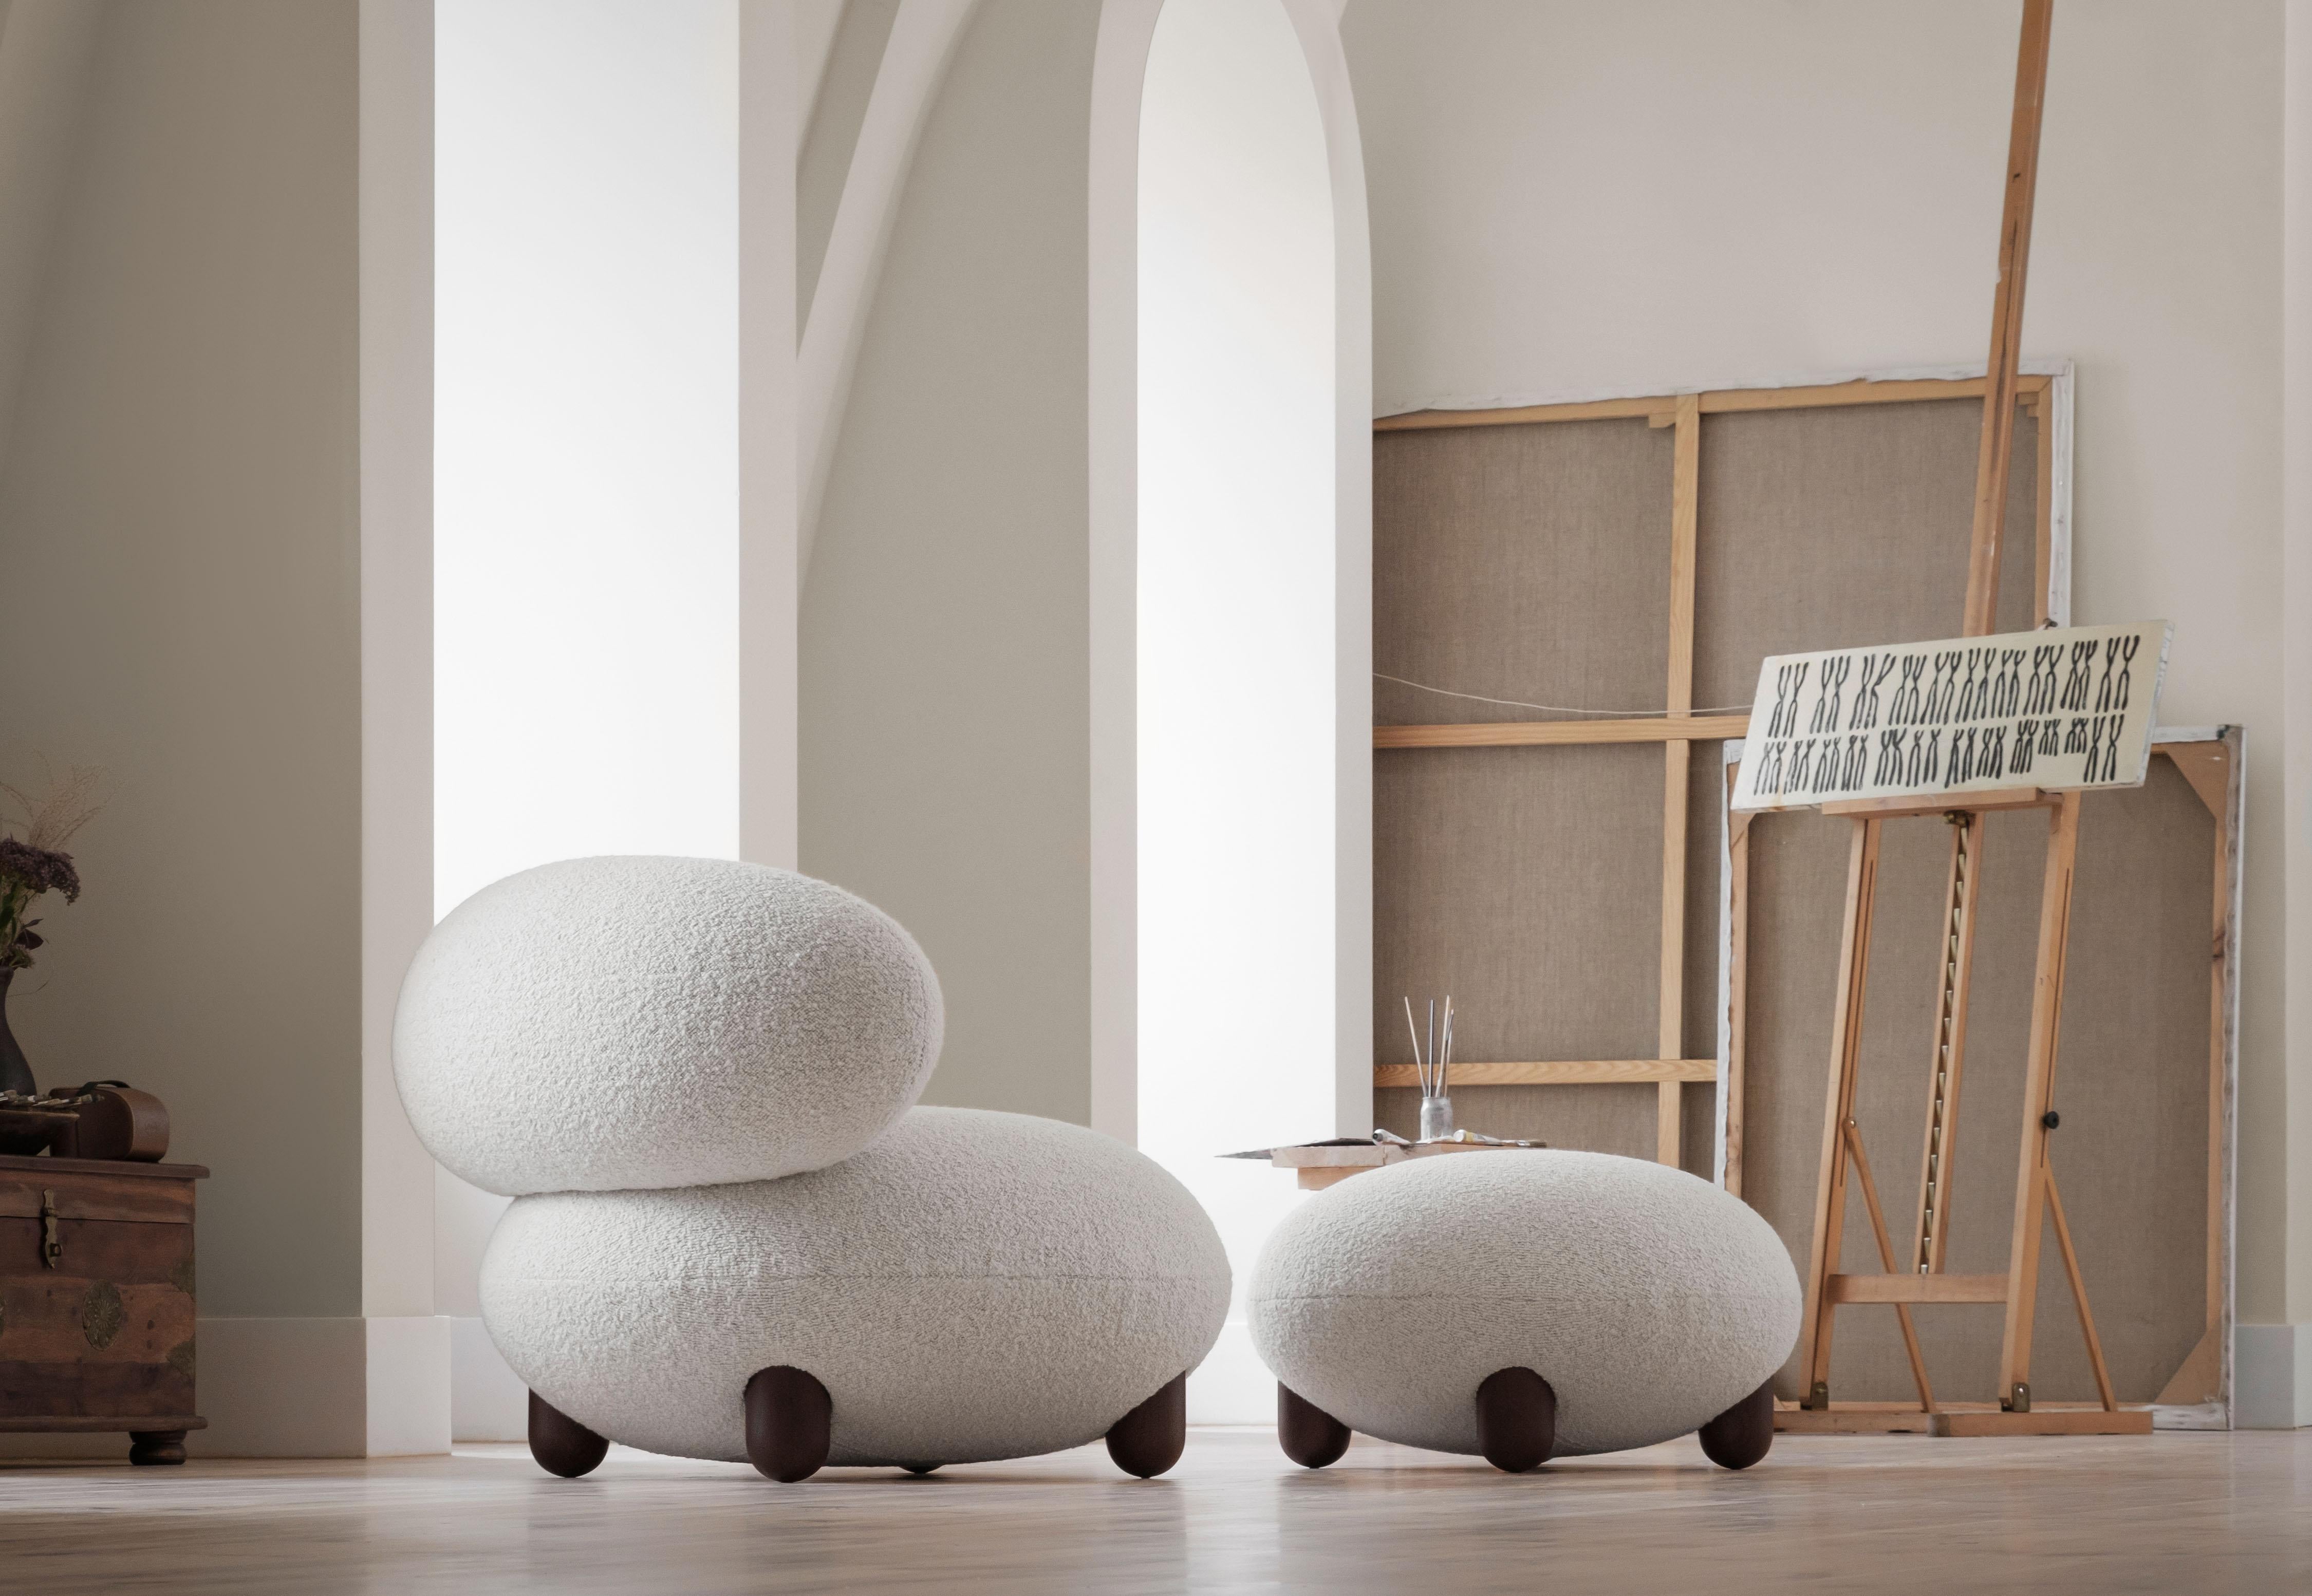 The “Flock” furniture collection draws on the idea that home is a place of comfort, sanctuary, and gathering and should be filled with personalized, character-rich, and eye-catching statement objects.

Soft, voluptuous, sensual forms, natural